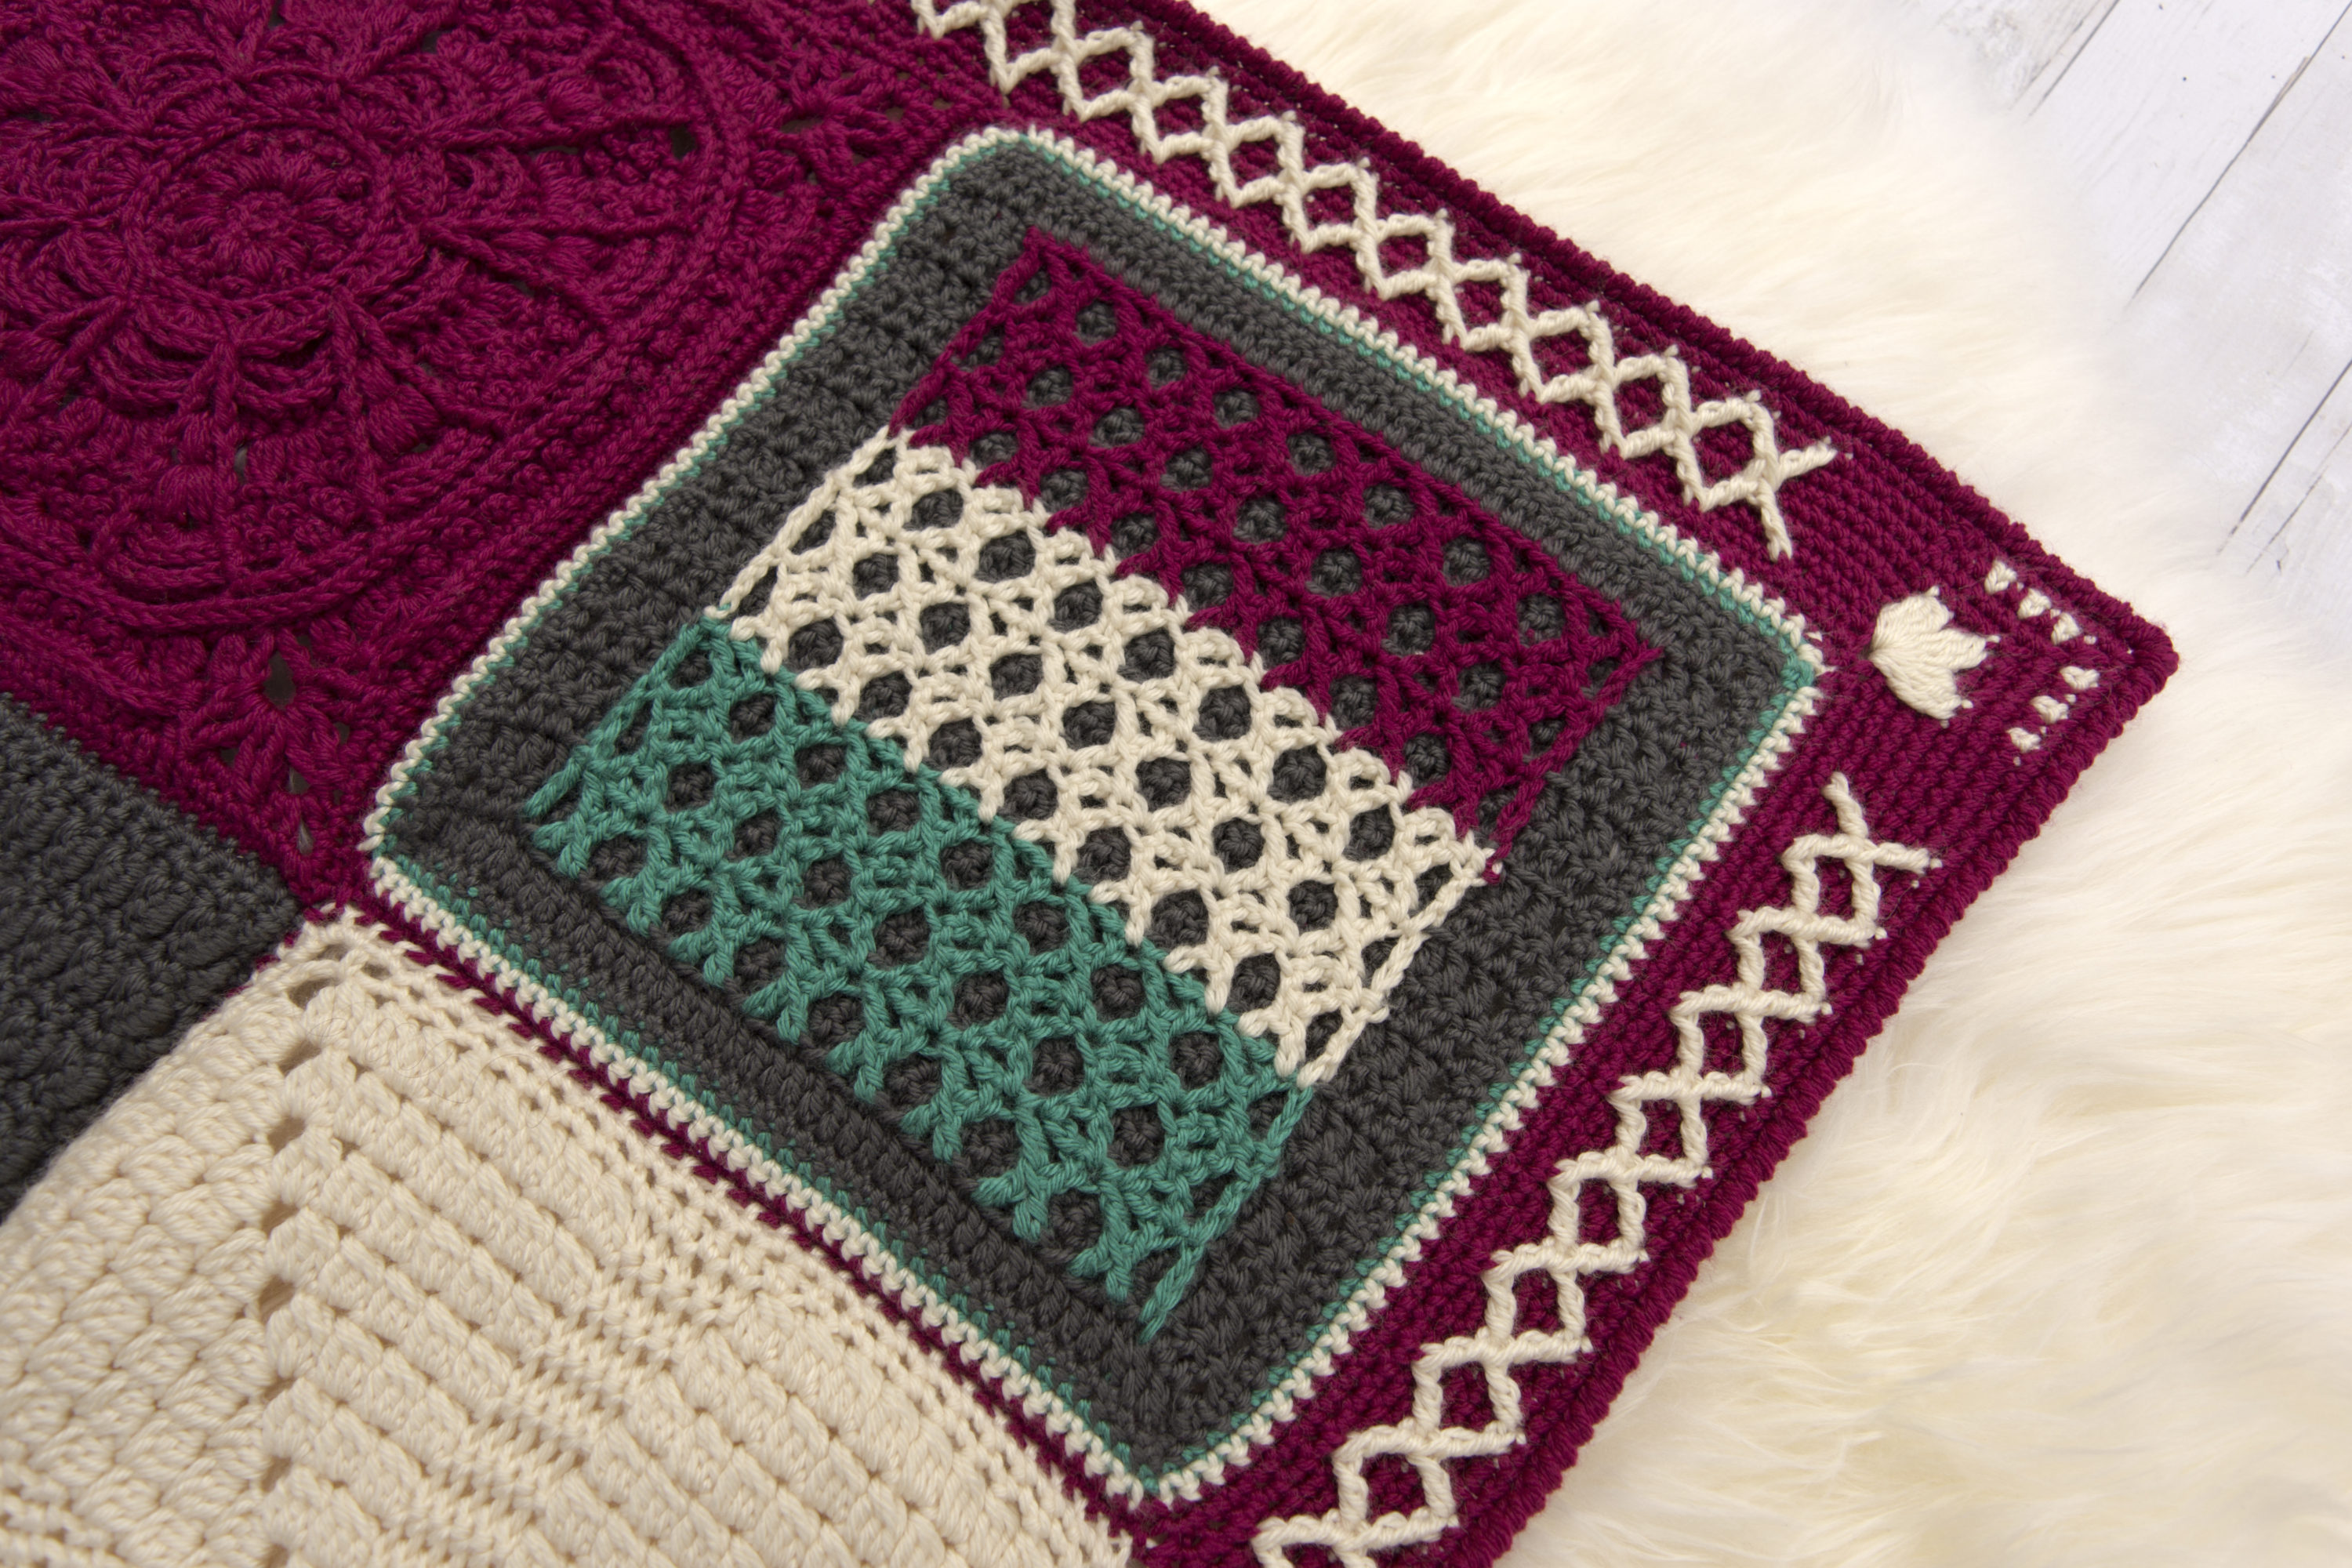 Kisses Square, a free crochet pattern, and part of the Creative Crossing Blanket.